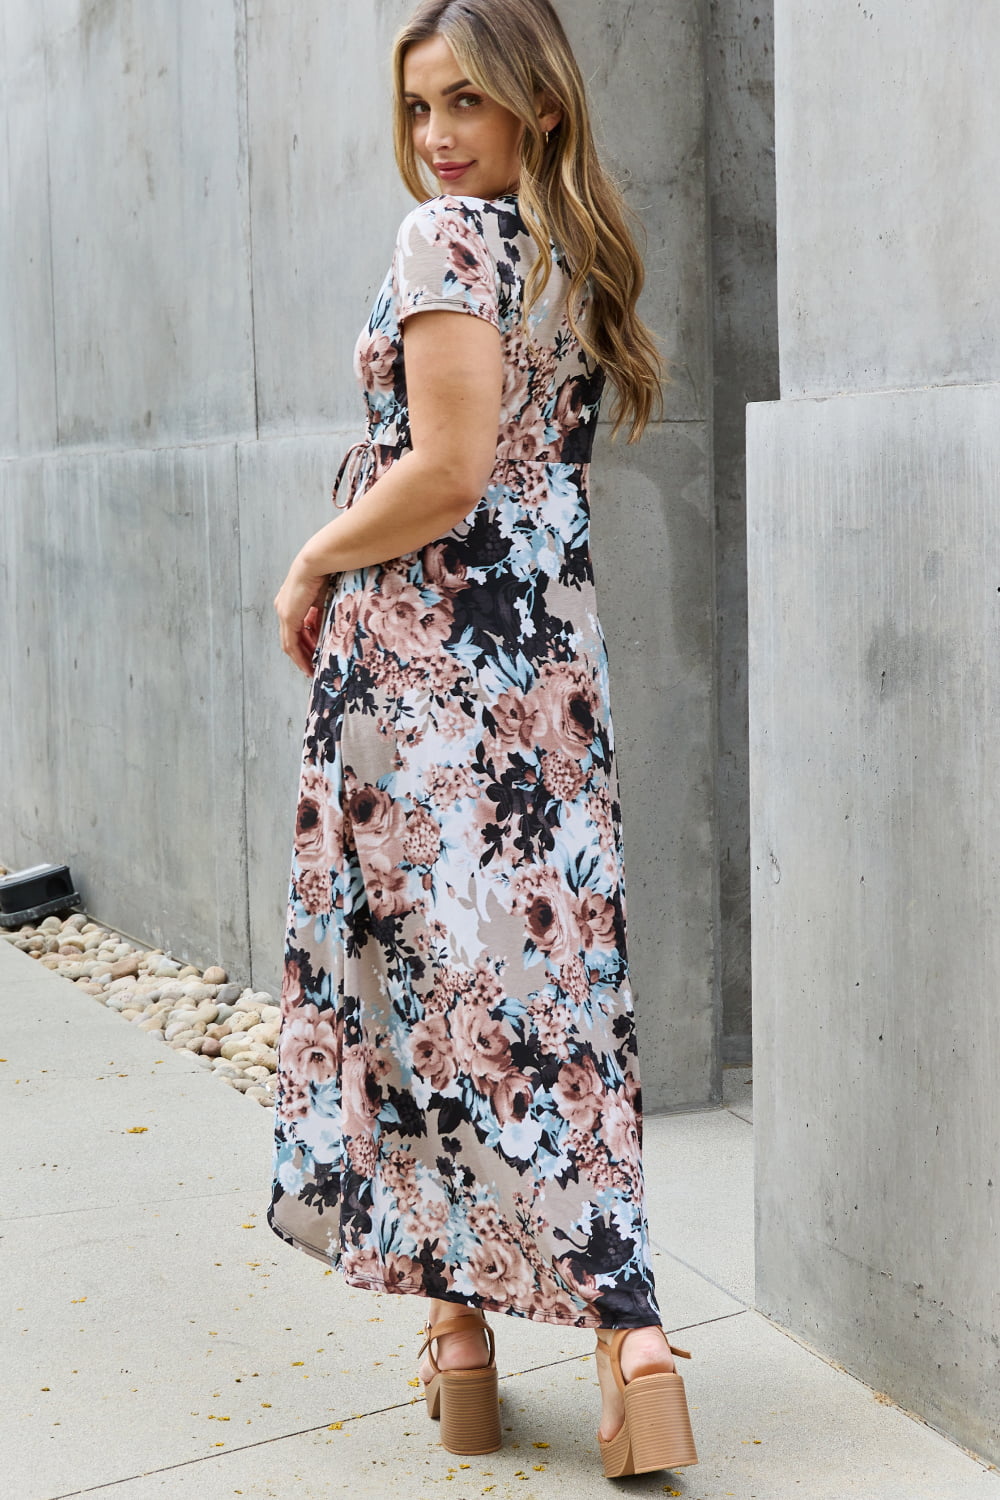 Give Me Roses Full Size Floral Maxi Wrap Dress - All Dresses - Dresses - 8 - 2024